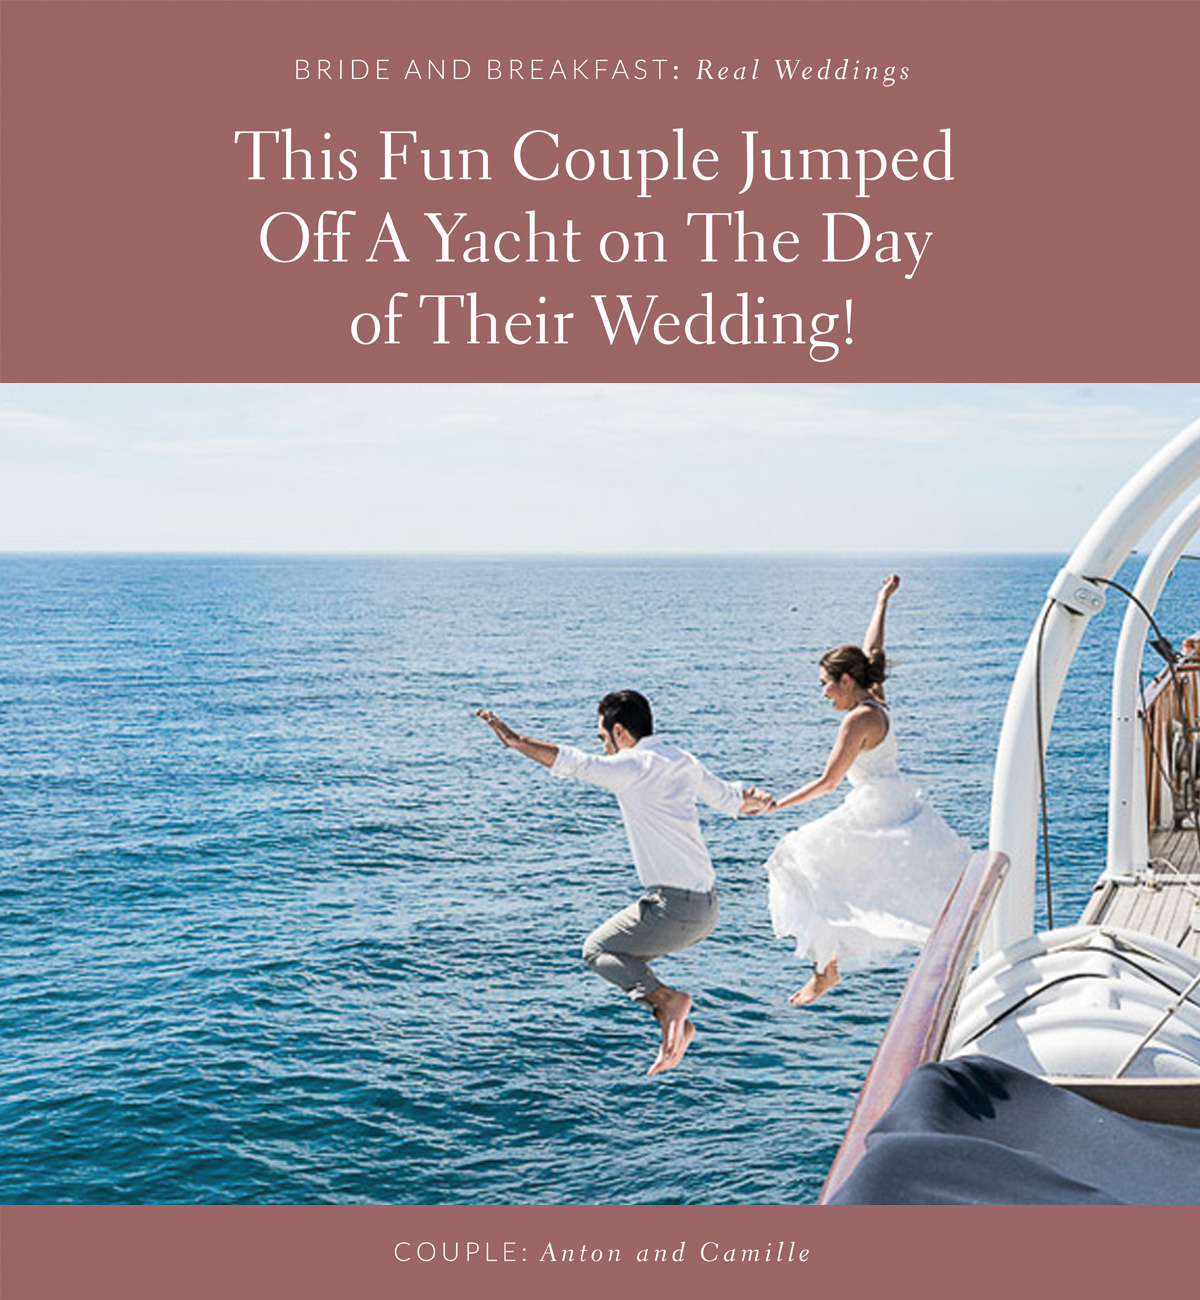 This Fun Couple Jumped Off A Yacht on The Day of Their Wedding!